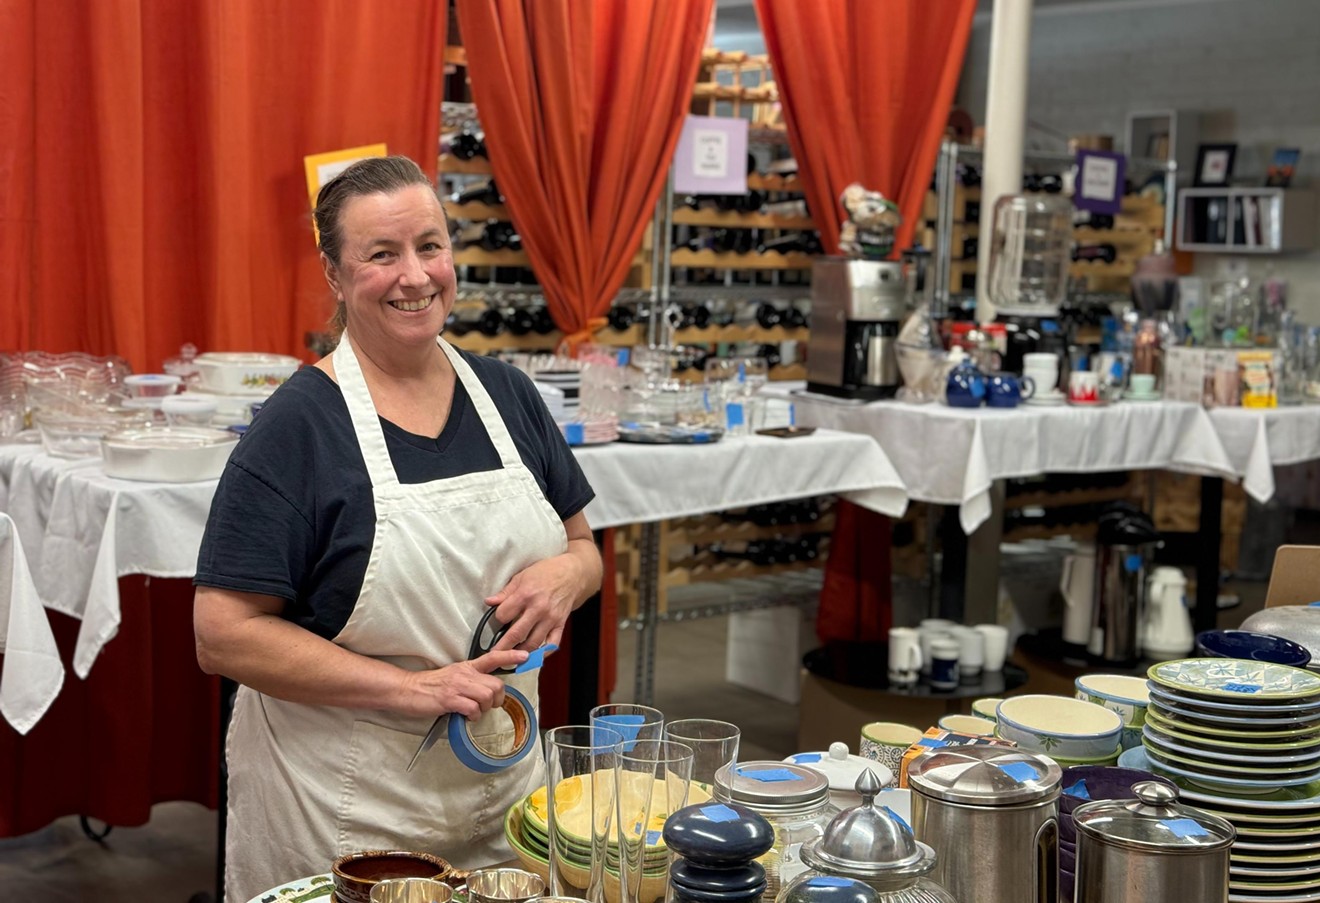 Tracy Dempsey will host a Culinary Rummage Sale on March 8 and 9, selling new and gently used kitchen items to benefit Blue Watermelon Project.